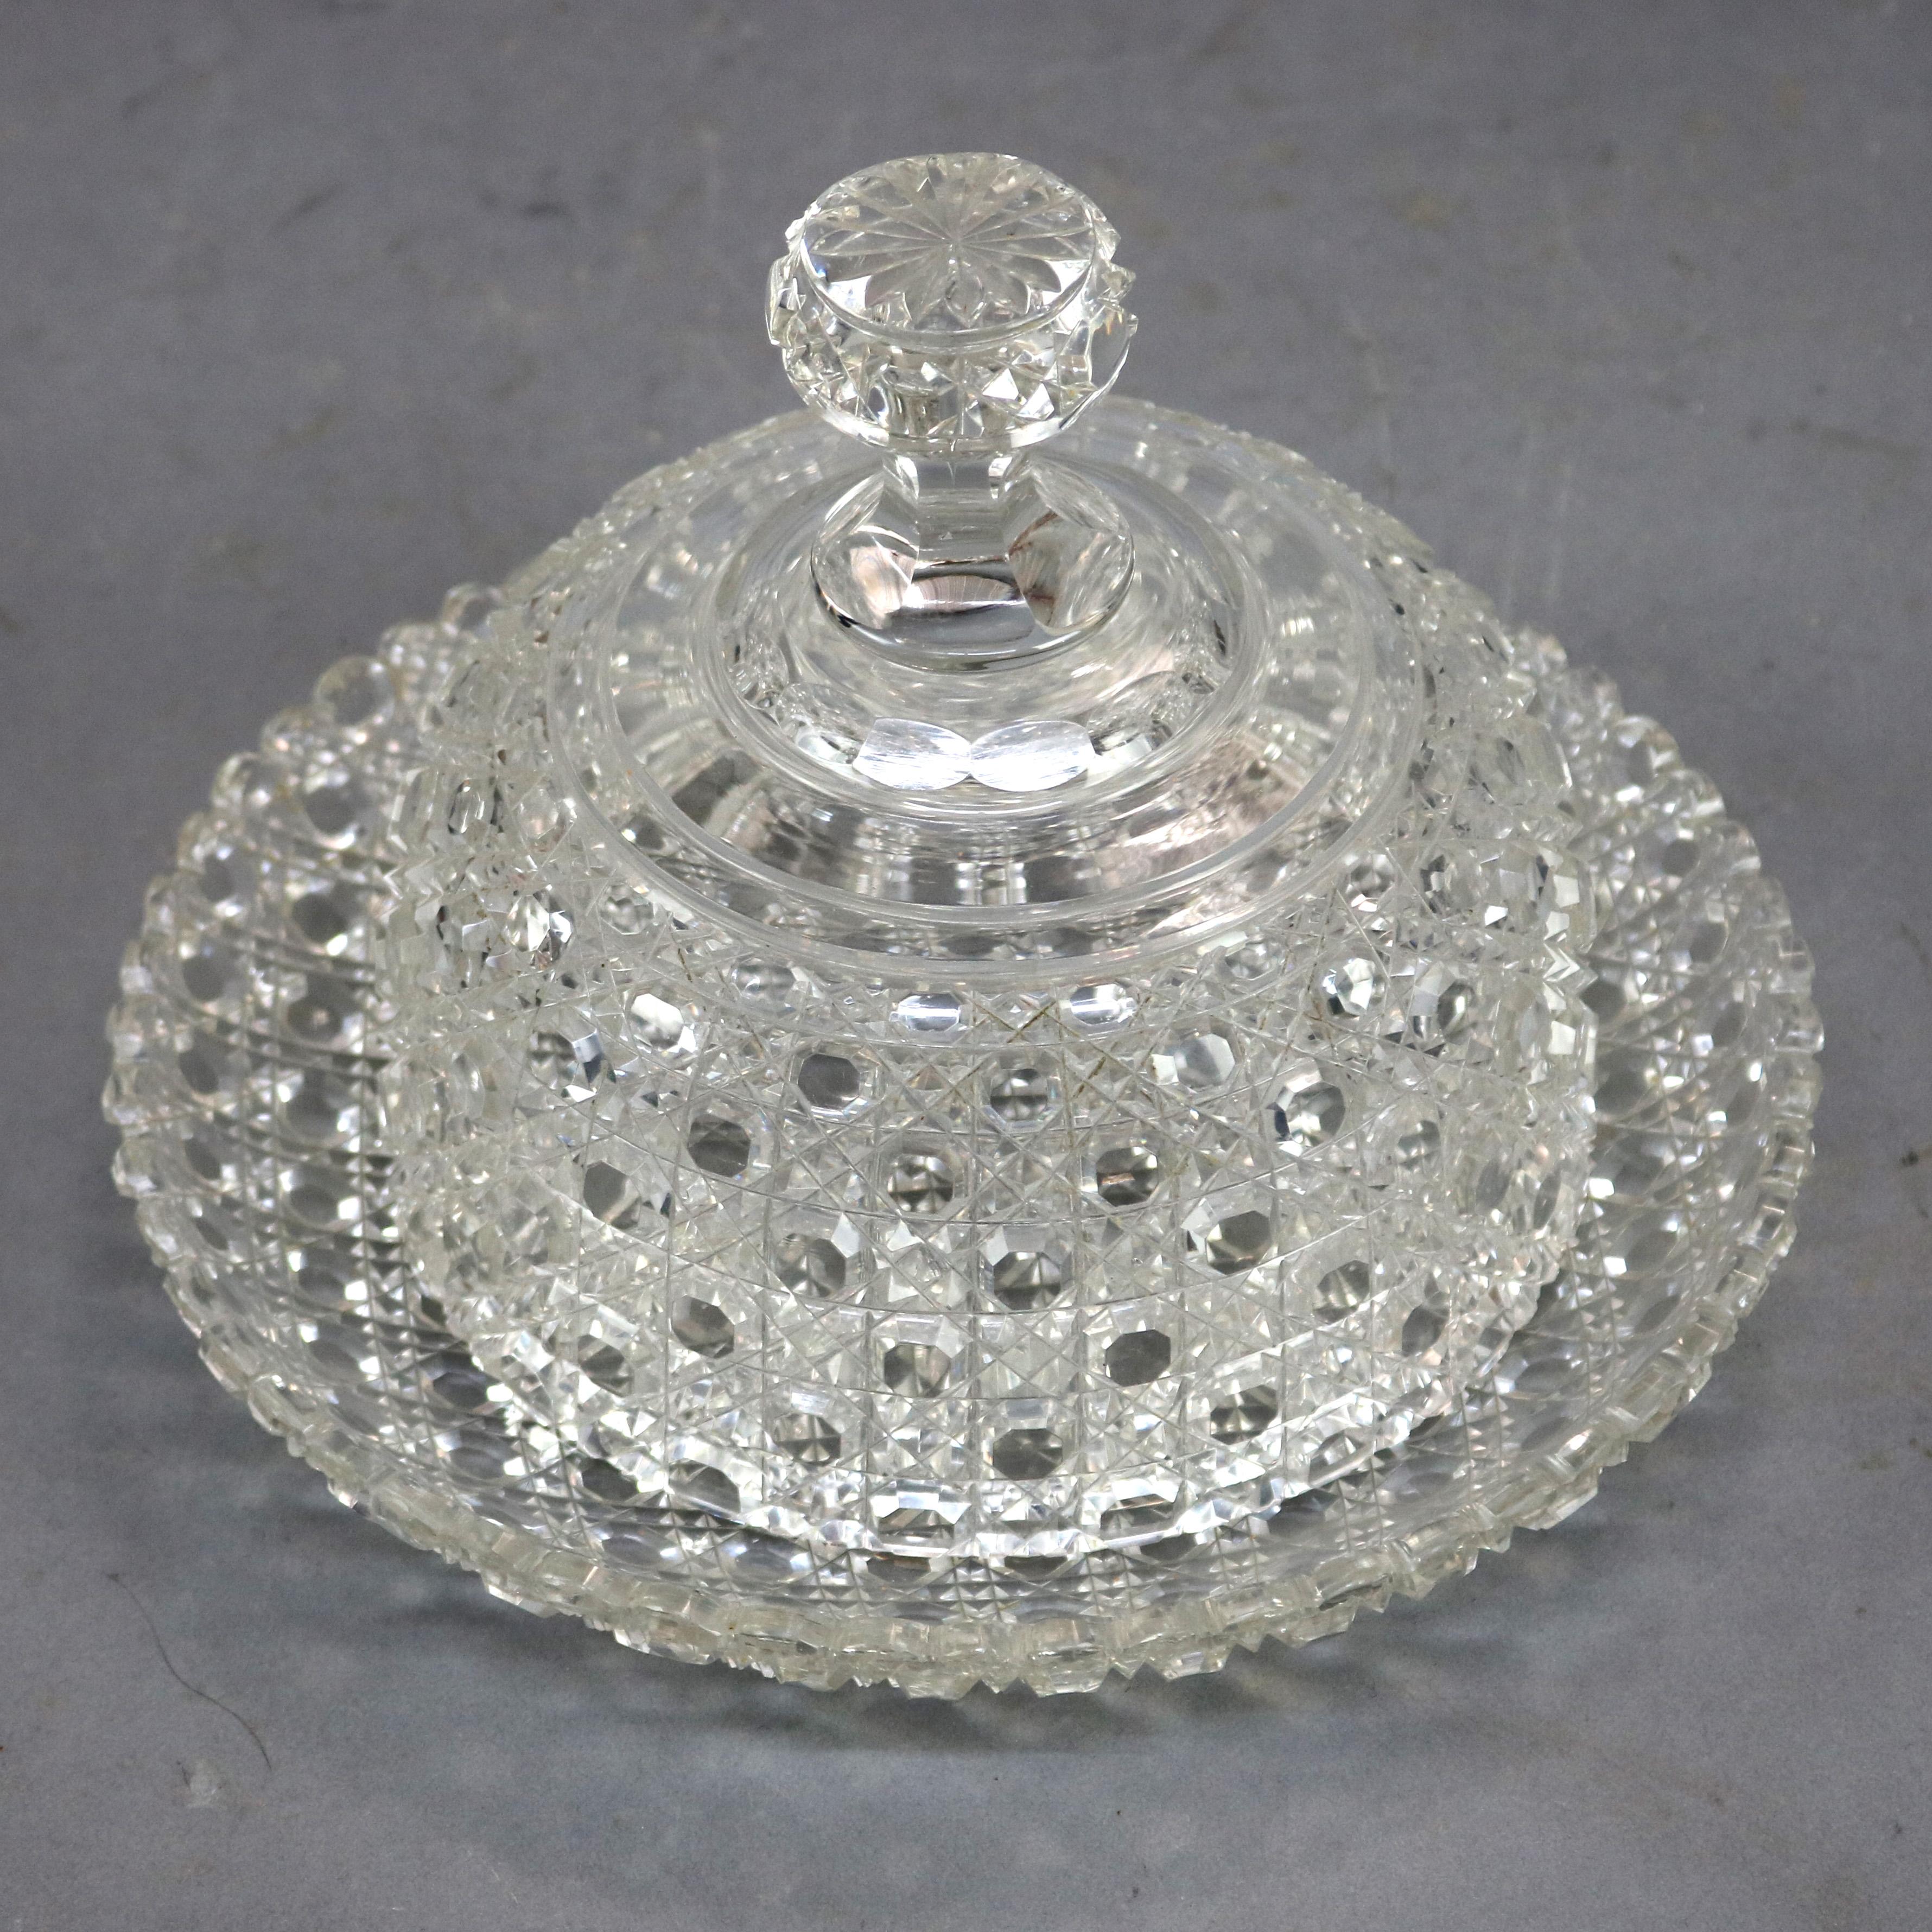 An antique American brilliant cut glass cheese dome offers lattice patterning, 20th century

Measures - 6.25